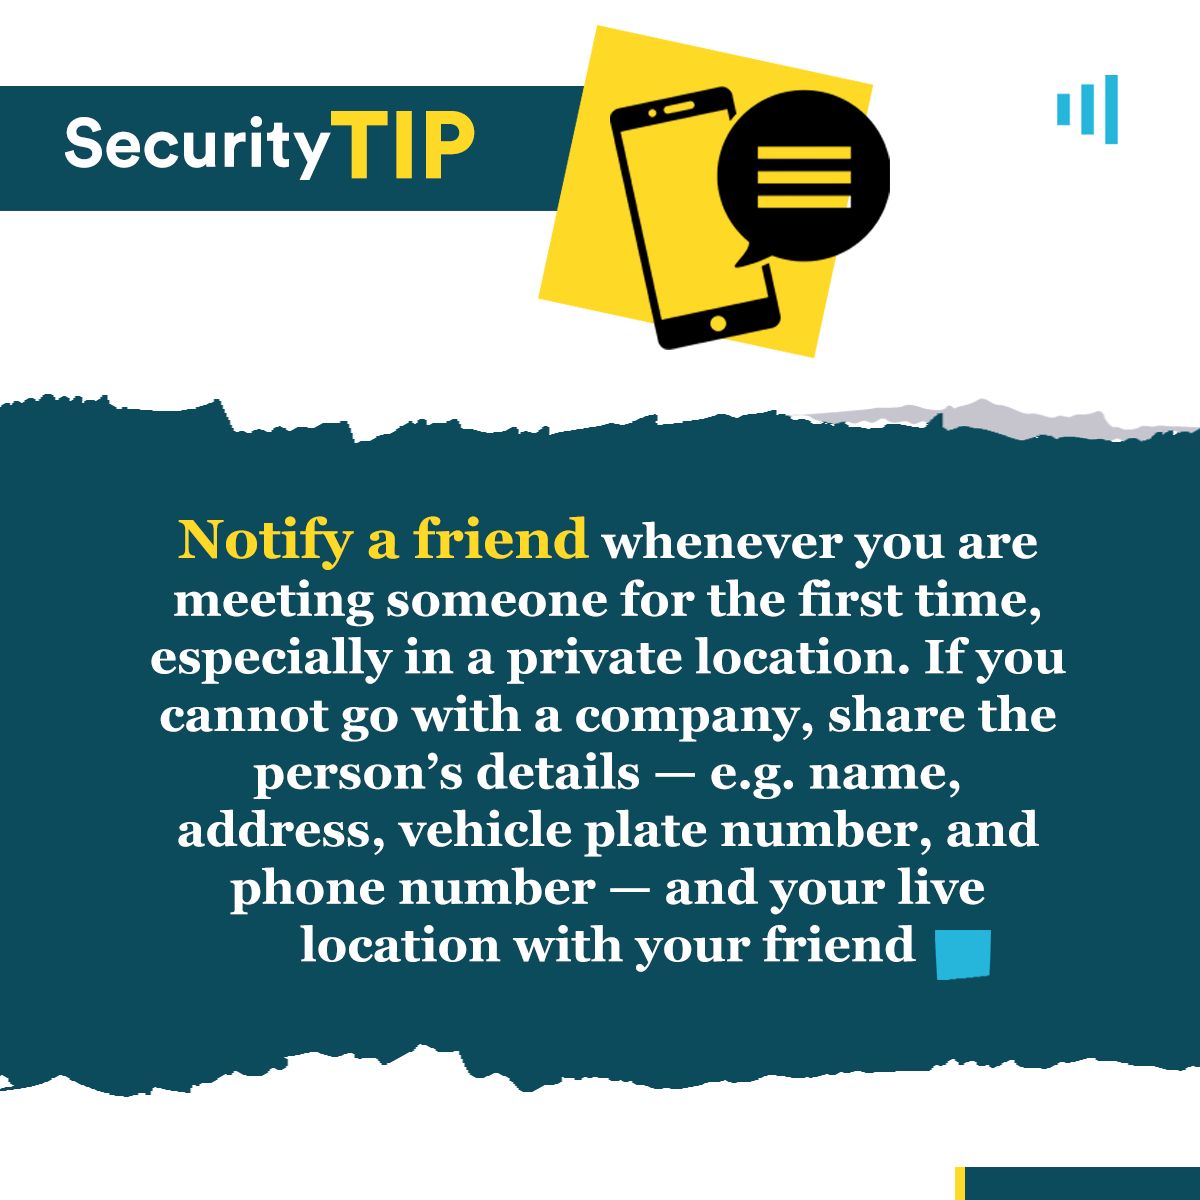 Security tip of the week: Notify a friend when meeting someone new. #HumAngleSecurityTip